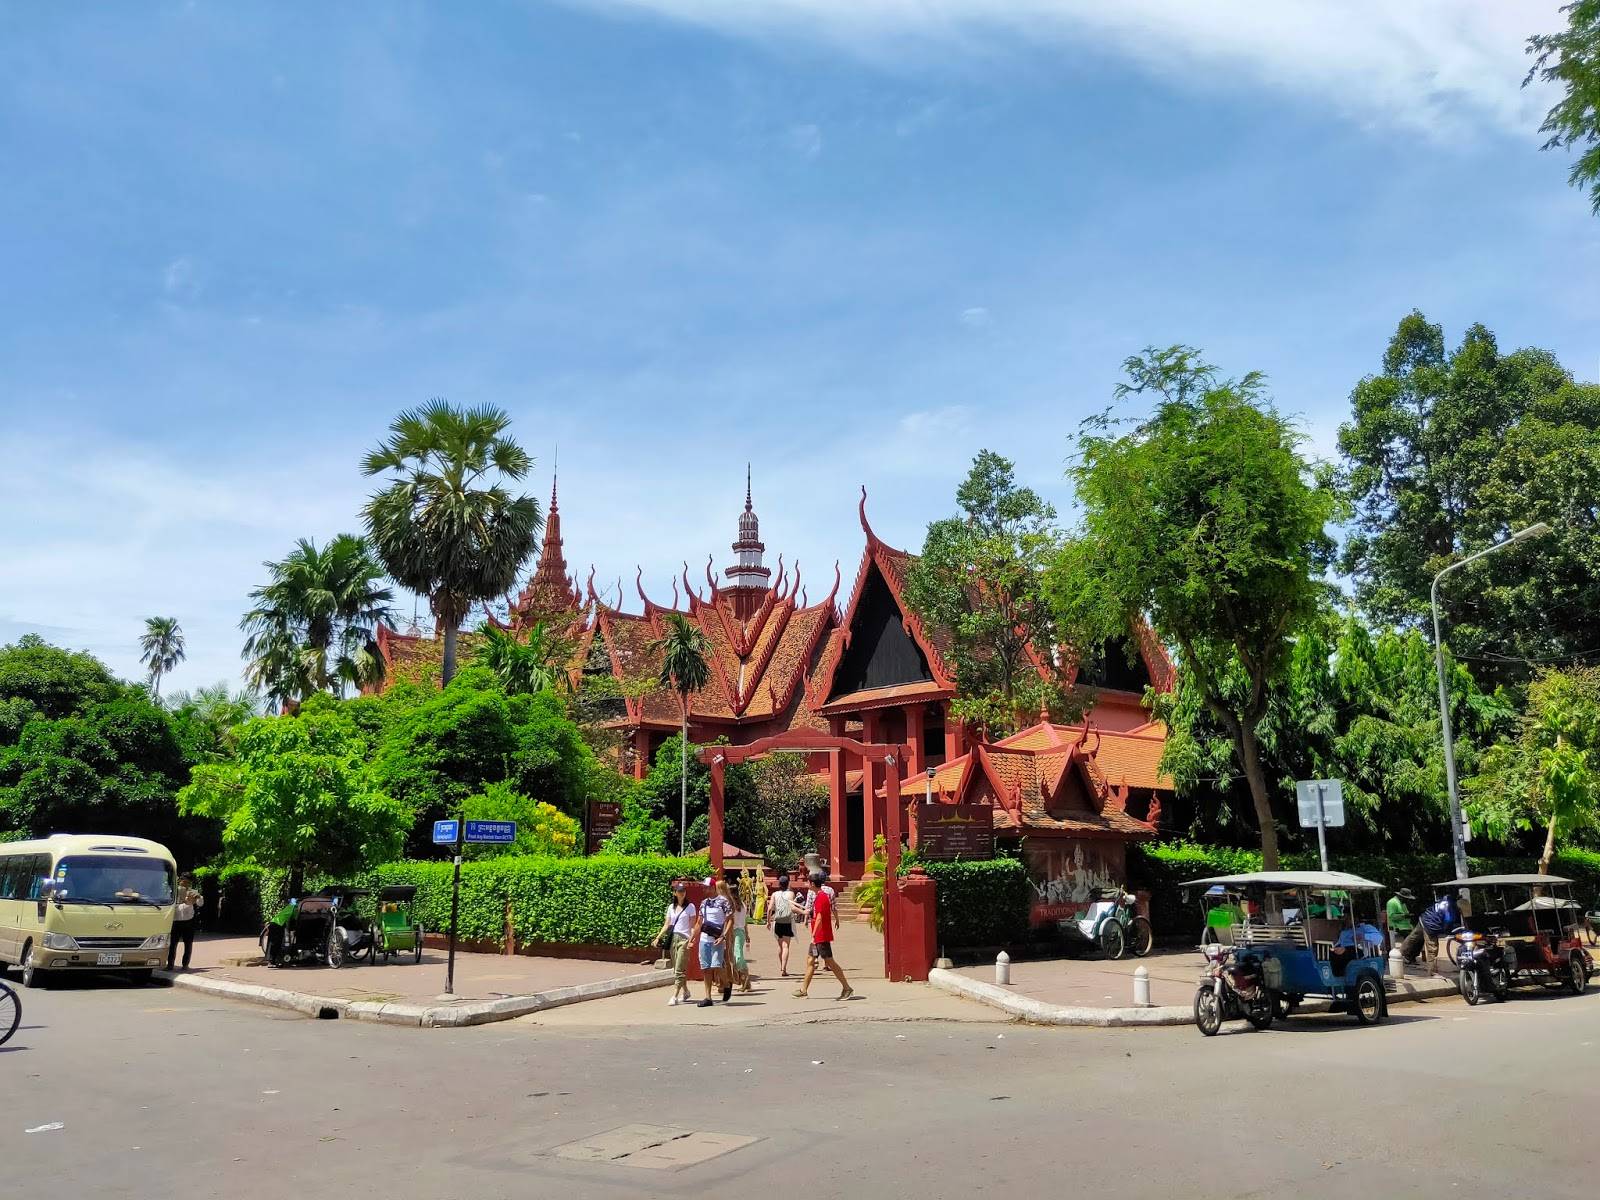 Phnom penh travel cost - average price of a vacation to phnom penh: food & meal budget, daily & weekly expenses | budgetyourtrip.com